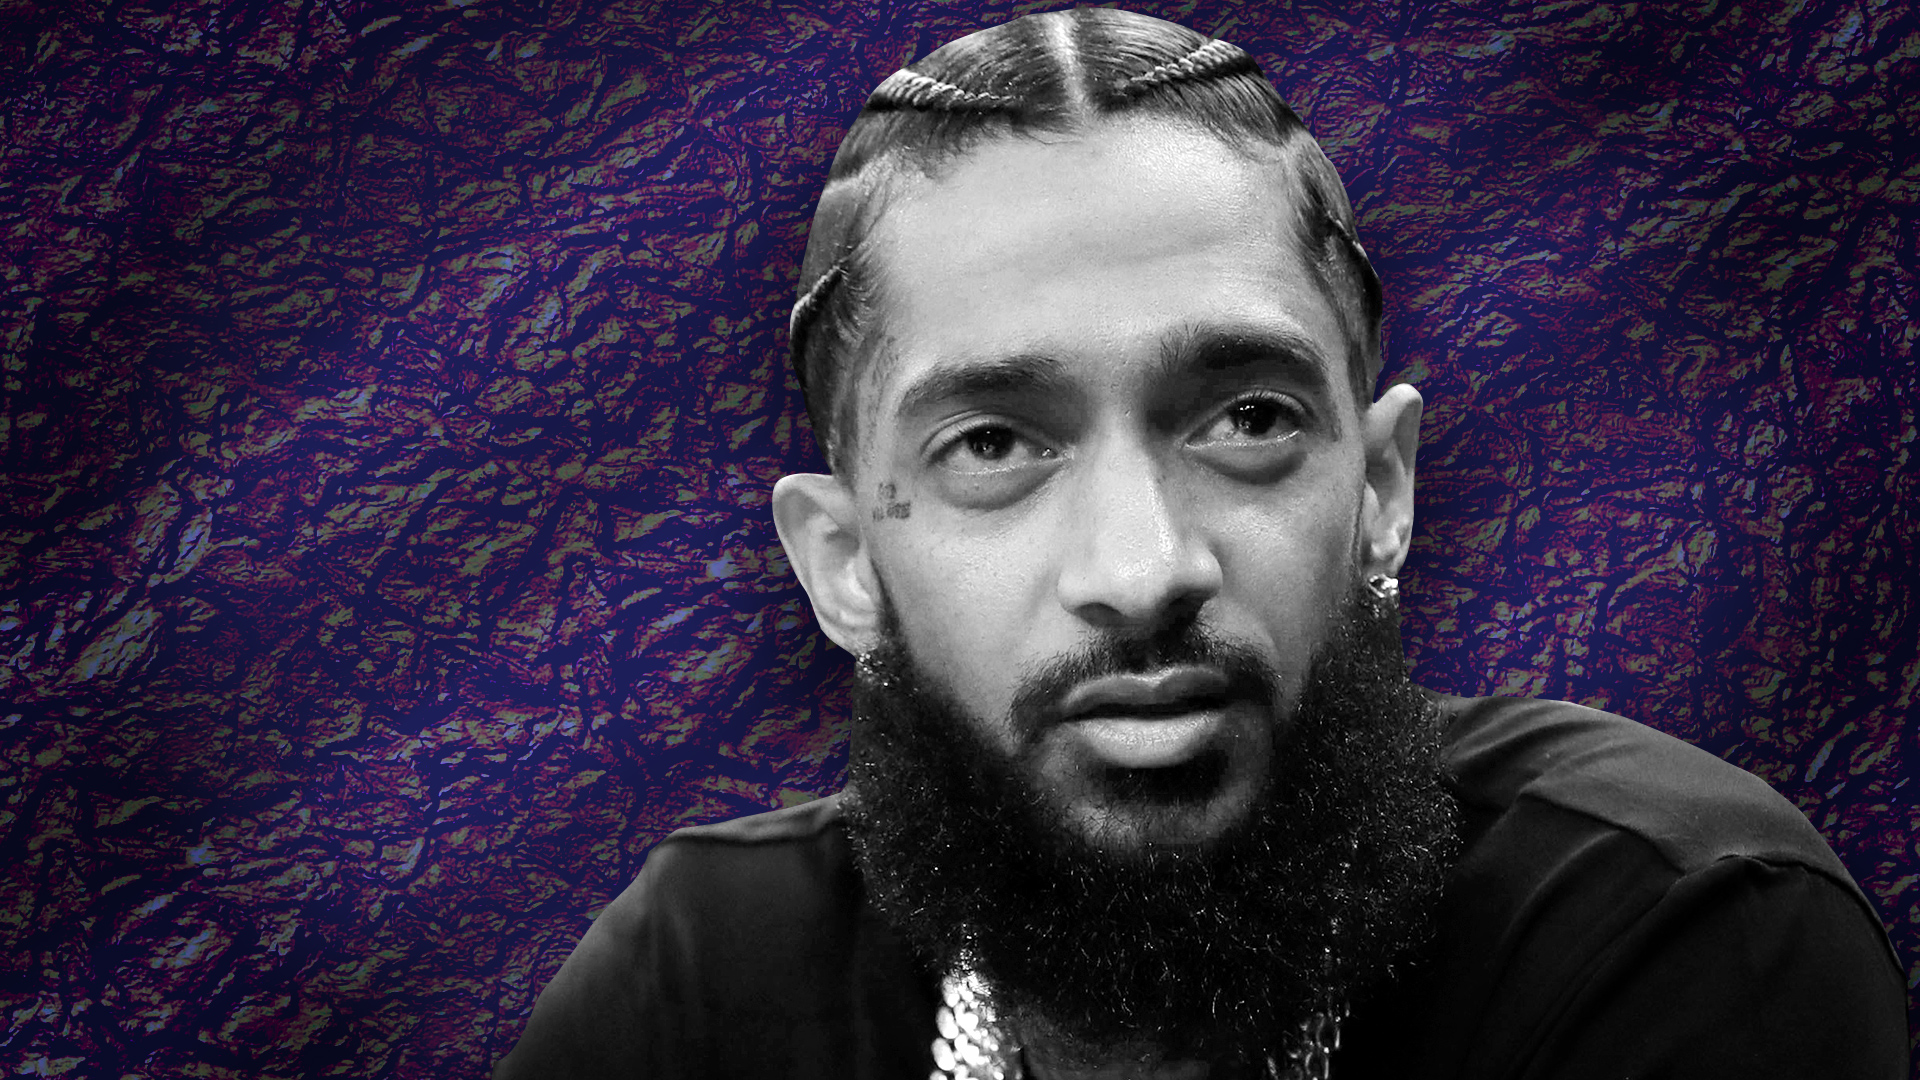 The life and legacy of Nipsey Hussle